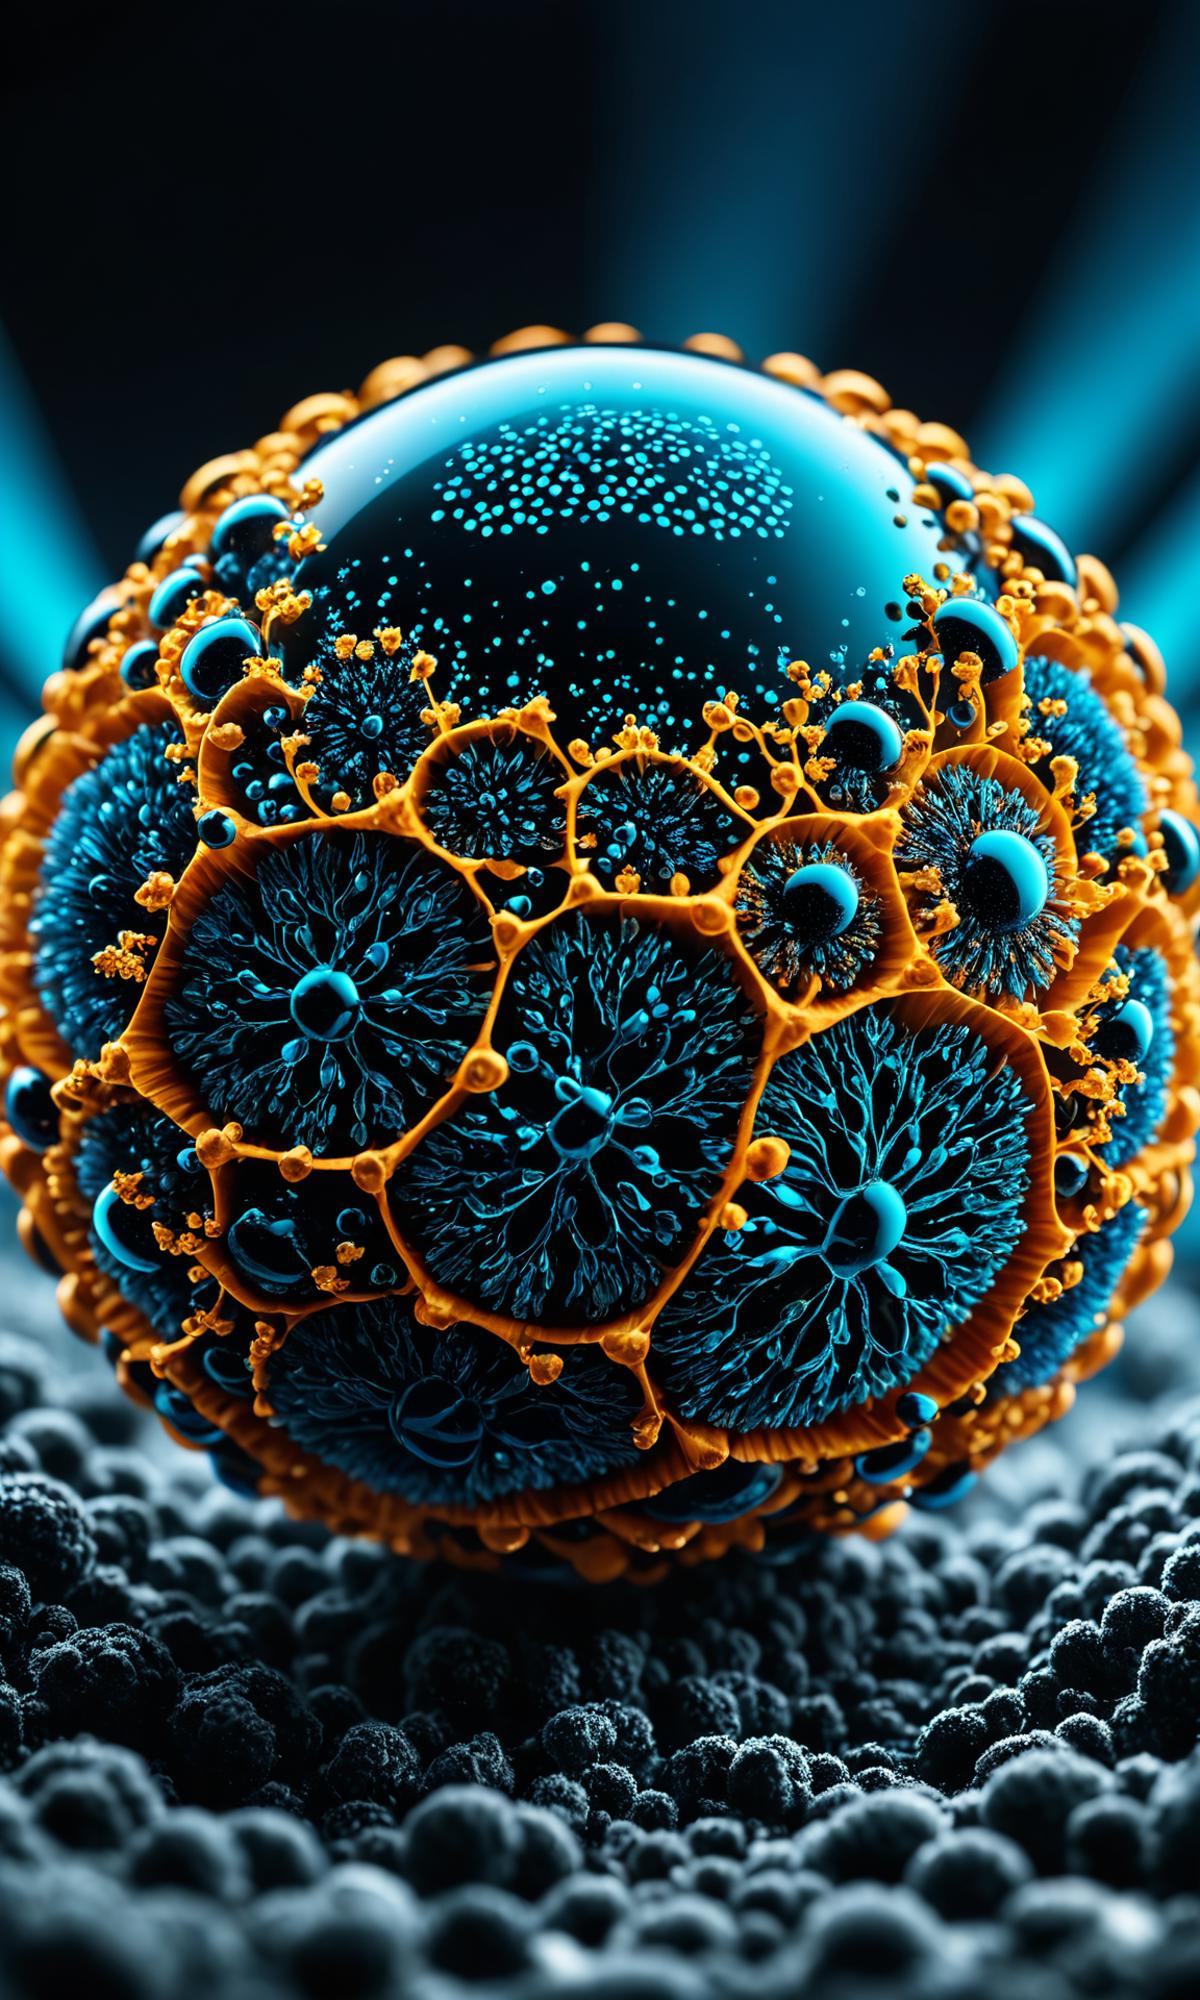 A close-up of a blue and orange sphere with several bumps and protrusions.